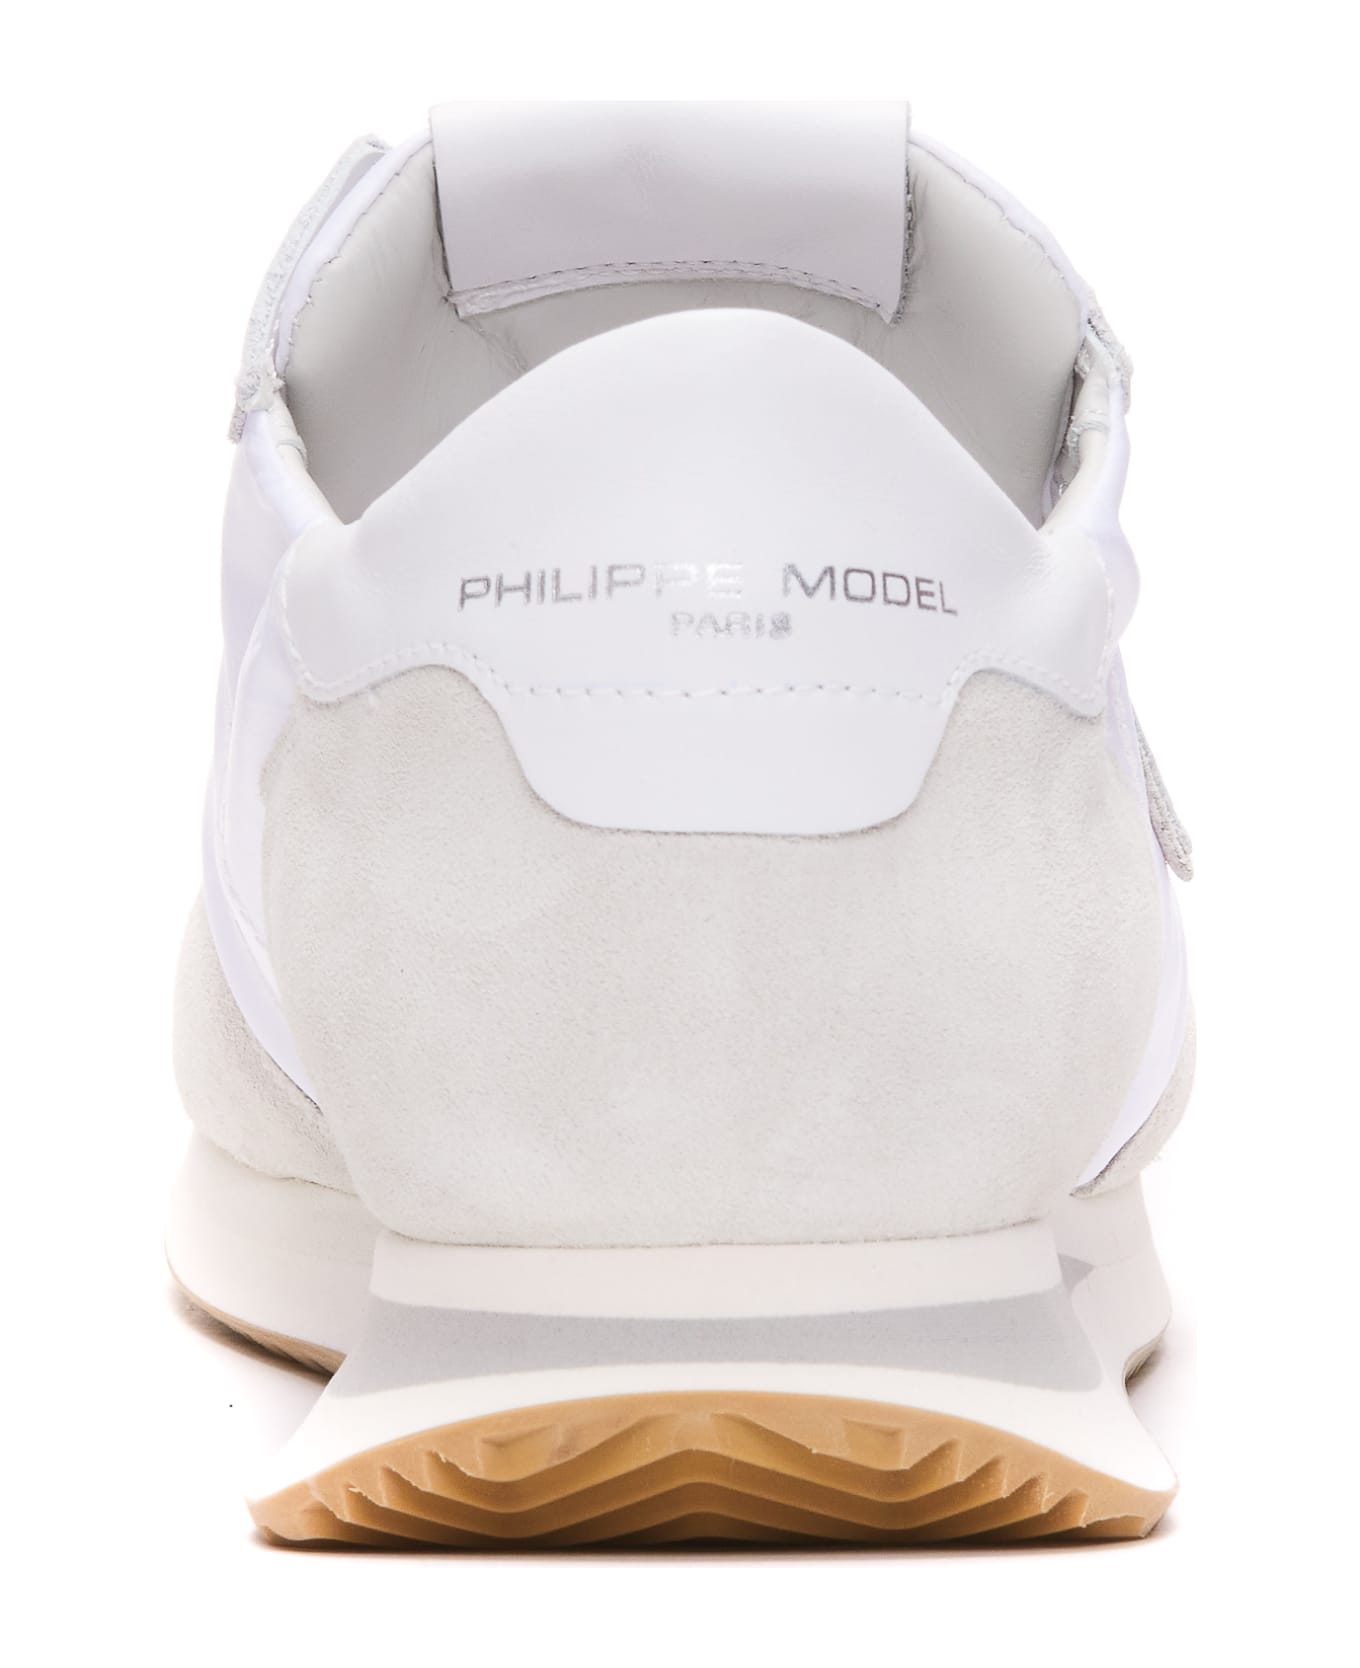 Philippe Model Trpx Low Sneakers - White